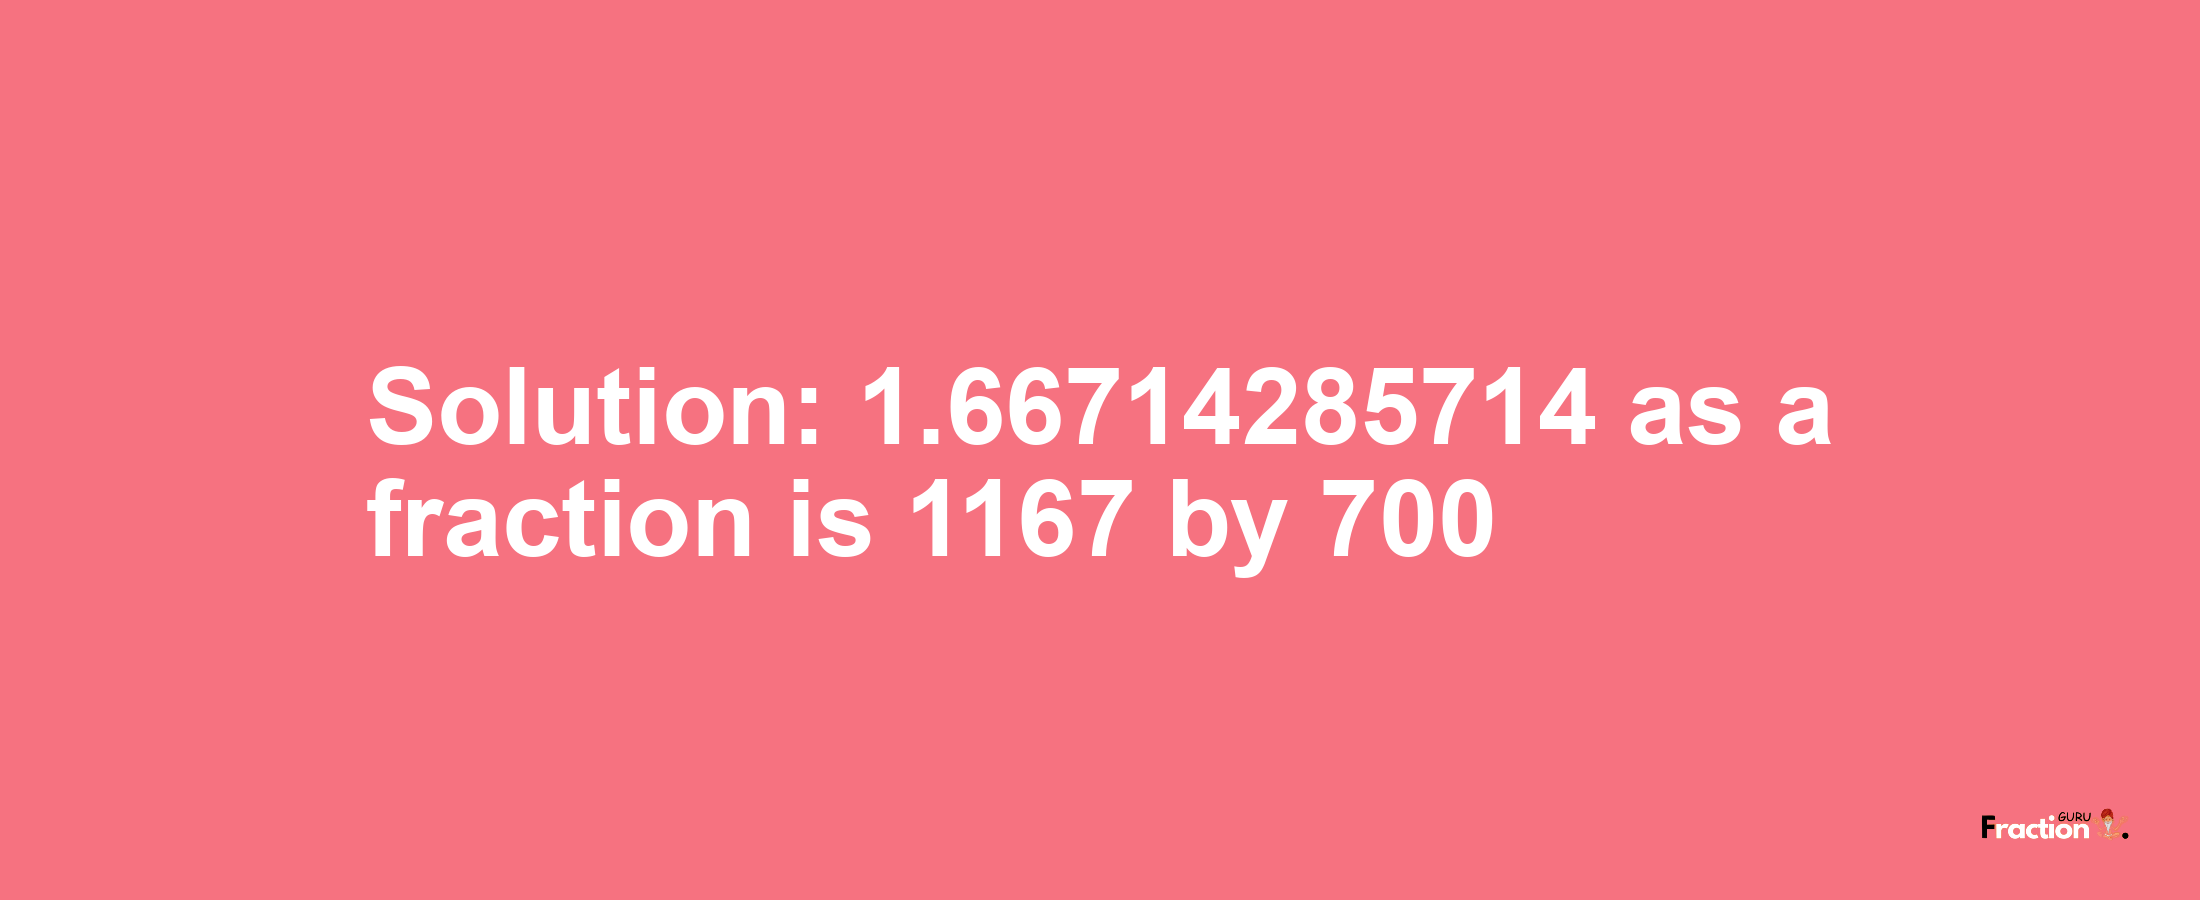 Solution:1.66714285714 as a fraction is 1167/700